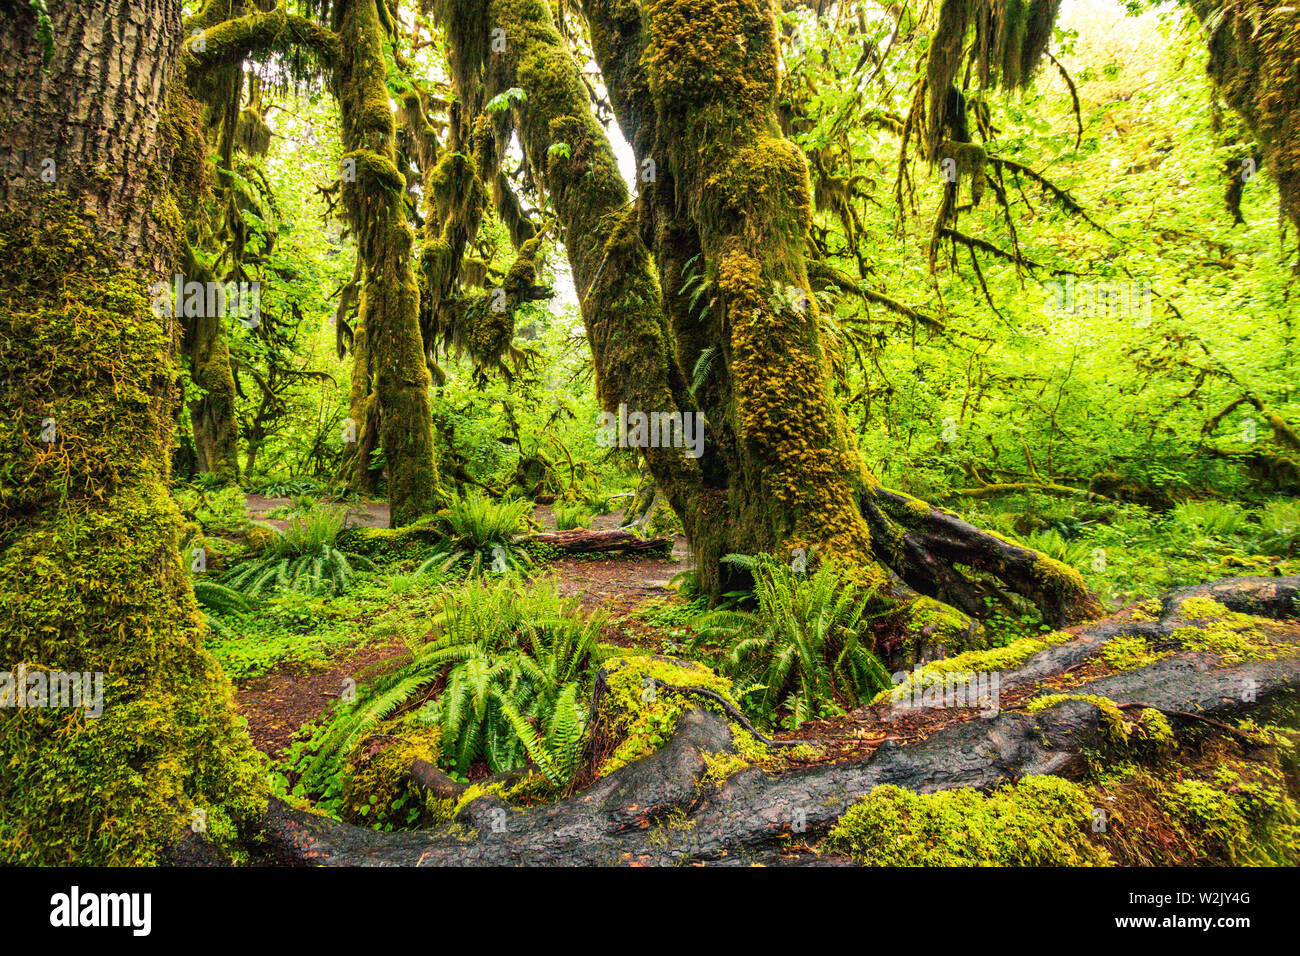 Hoh Rain Forest is situated in Washington, United States of America, nature, landscape, background, wildlife, elk, tourism, Travel USA, North America, Stock Photo